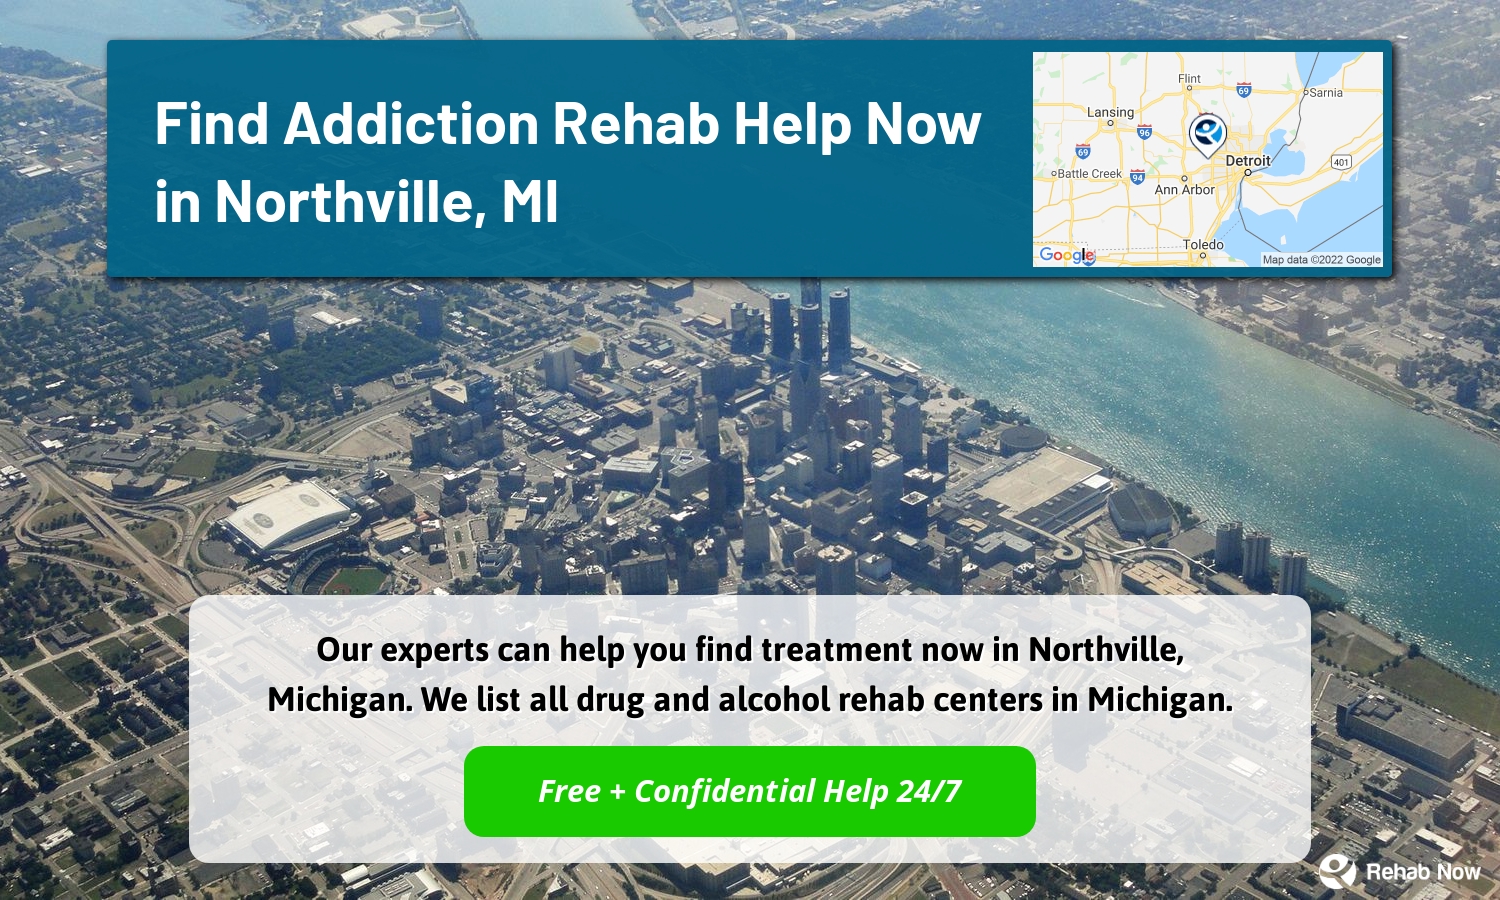 Our experts can help you find treatment now in Northville, Michigan. We list all drug and alcohol rehab centers in Michigan.